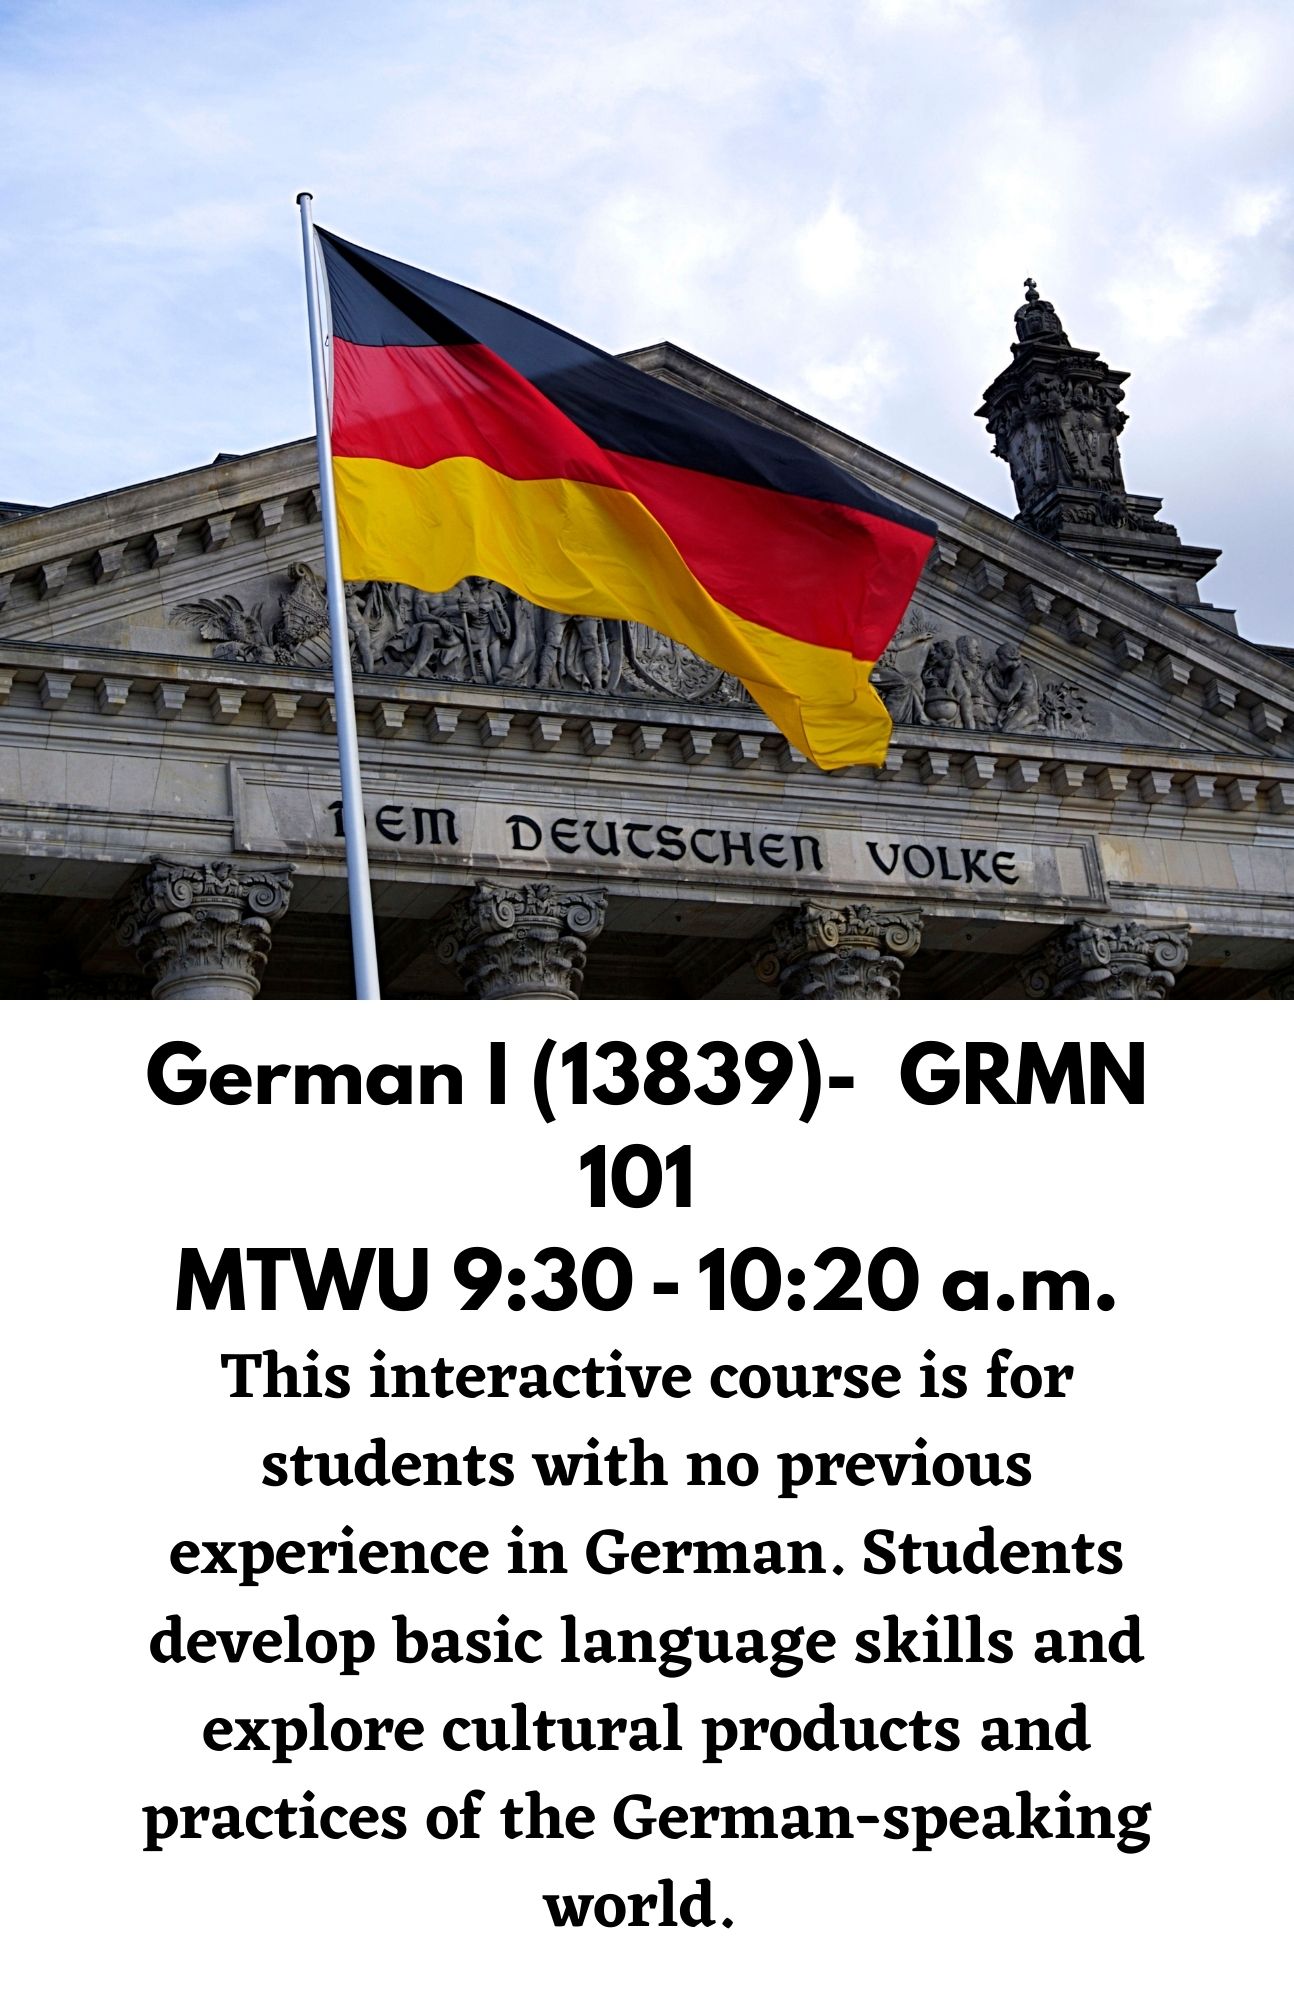 German I (13839)-  GRMN 101  MTWU 9:30 - 10:20 a.m. This interactive course is for students with no previous experience in German. Students develop basic language skills and explore cultural products and practices of the German-speaking world.